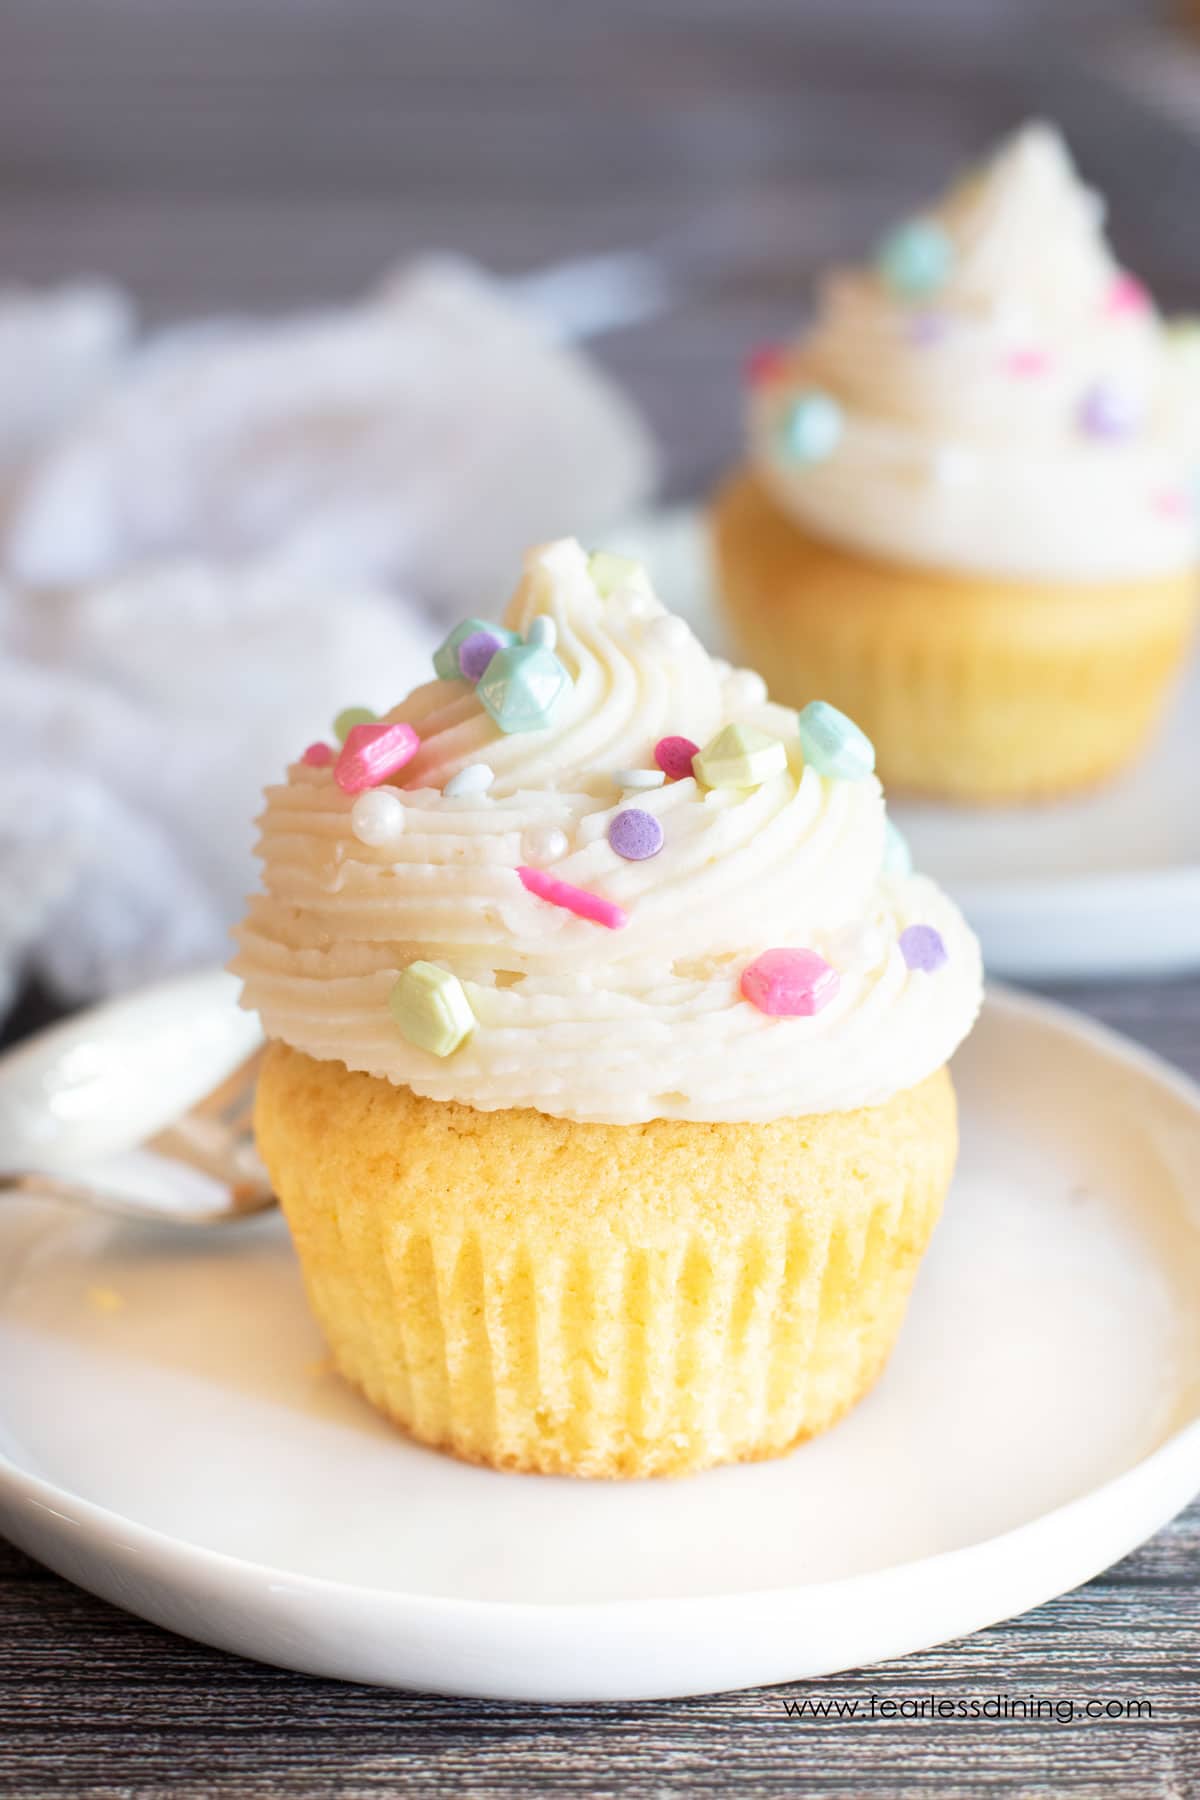 A gluten free frosted cupcakes on a plate.